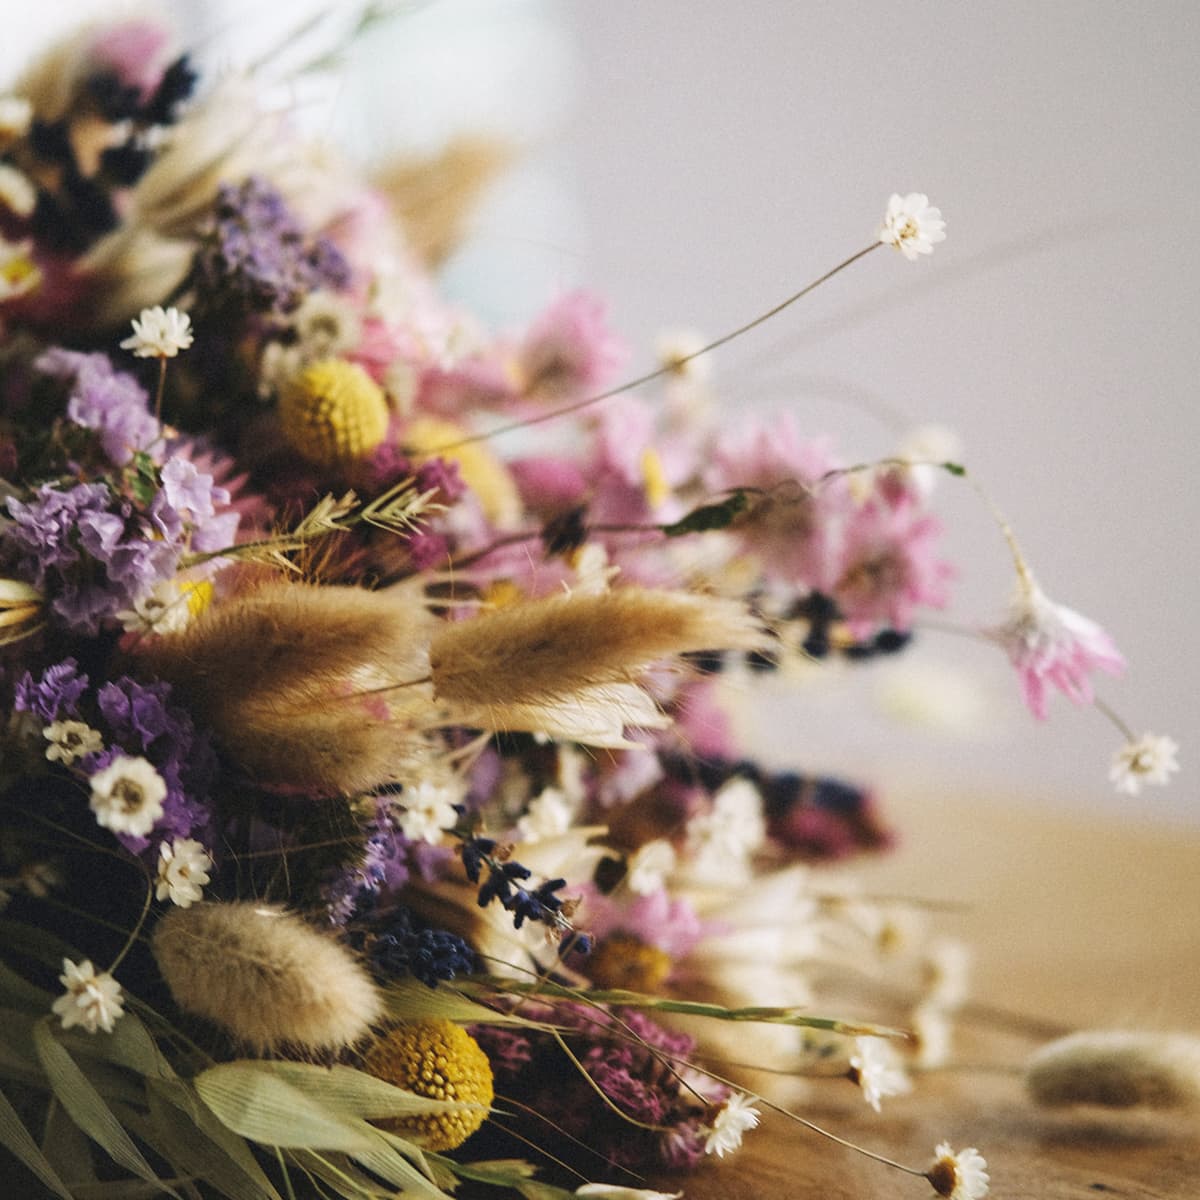 A close-up of a mixed dried flowers bouquet announces the dried flowers product category.